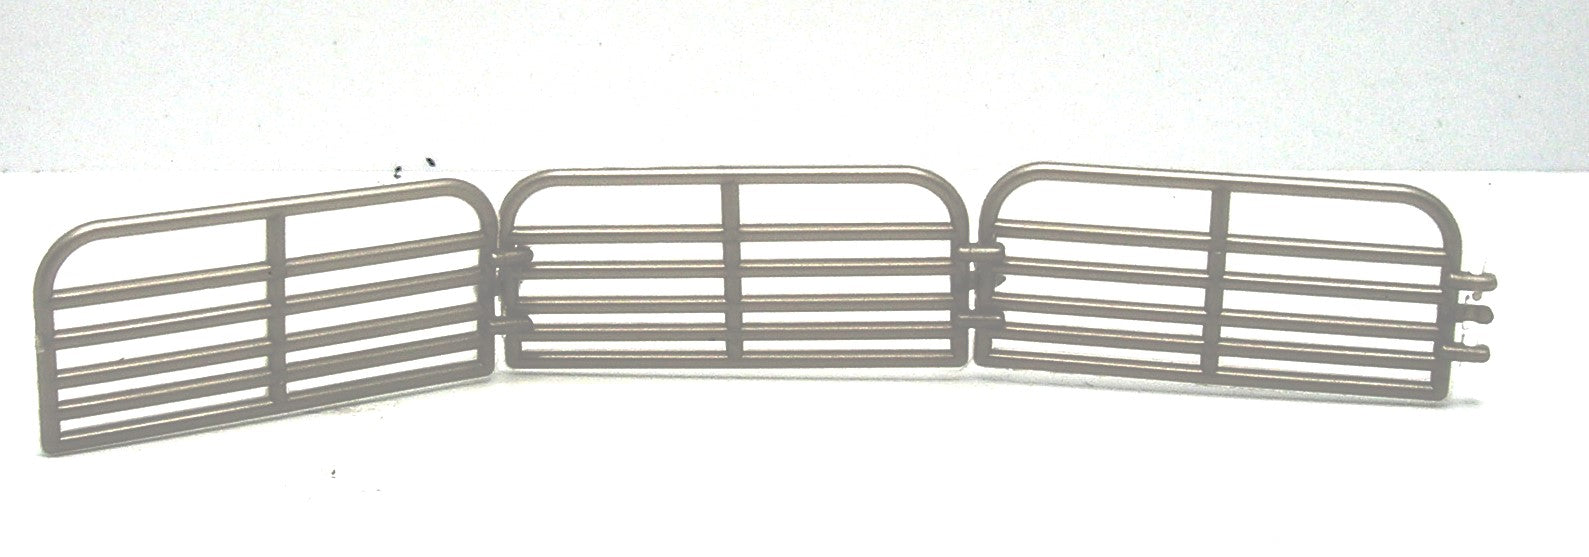 1/64 STANDI TOY 10FT SILVER CATTLE GATES 3 PK